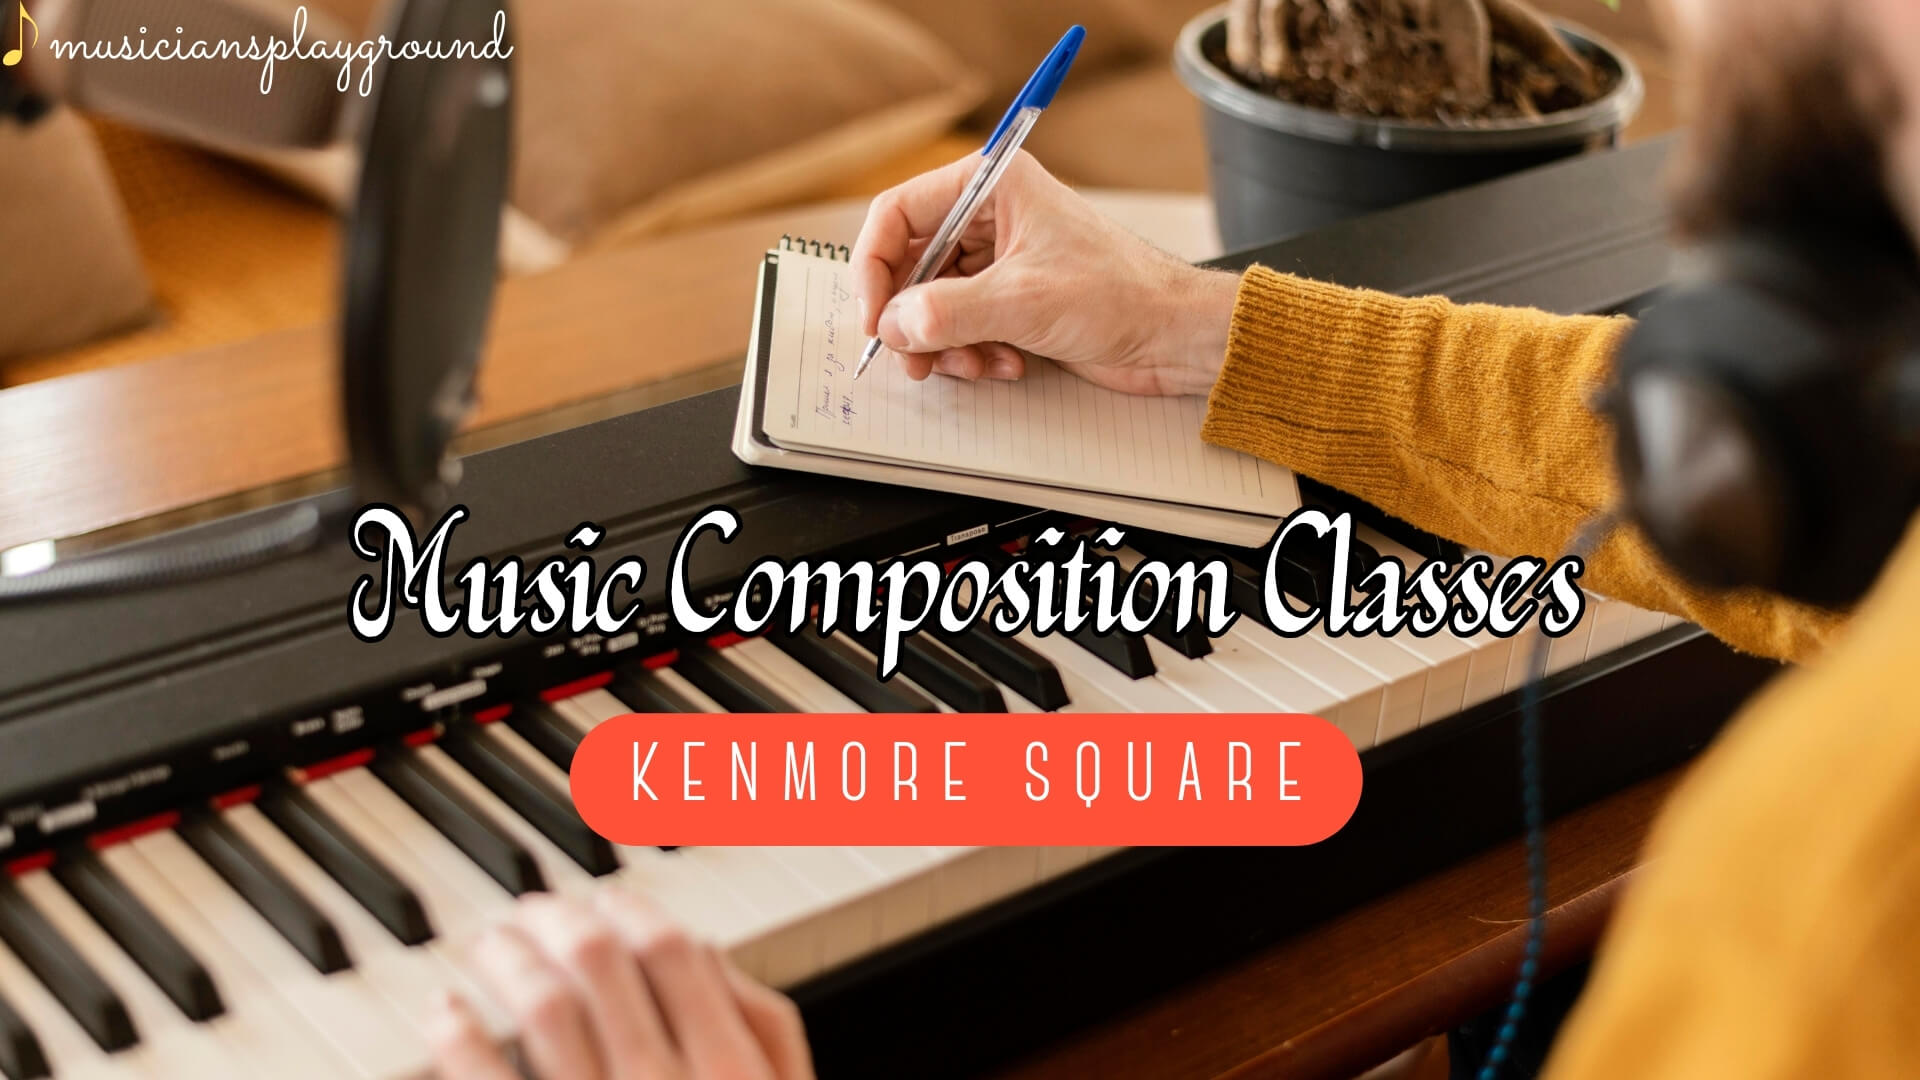 Music Composition Classes in Kenmore Square, Massachusetts: Enhance Your Musical Skills at Musicians Playground